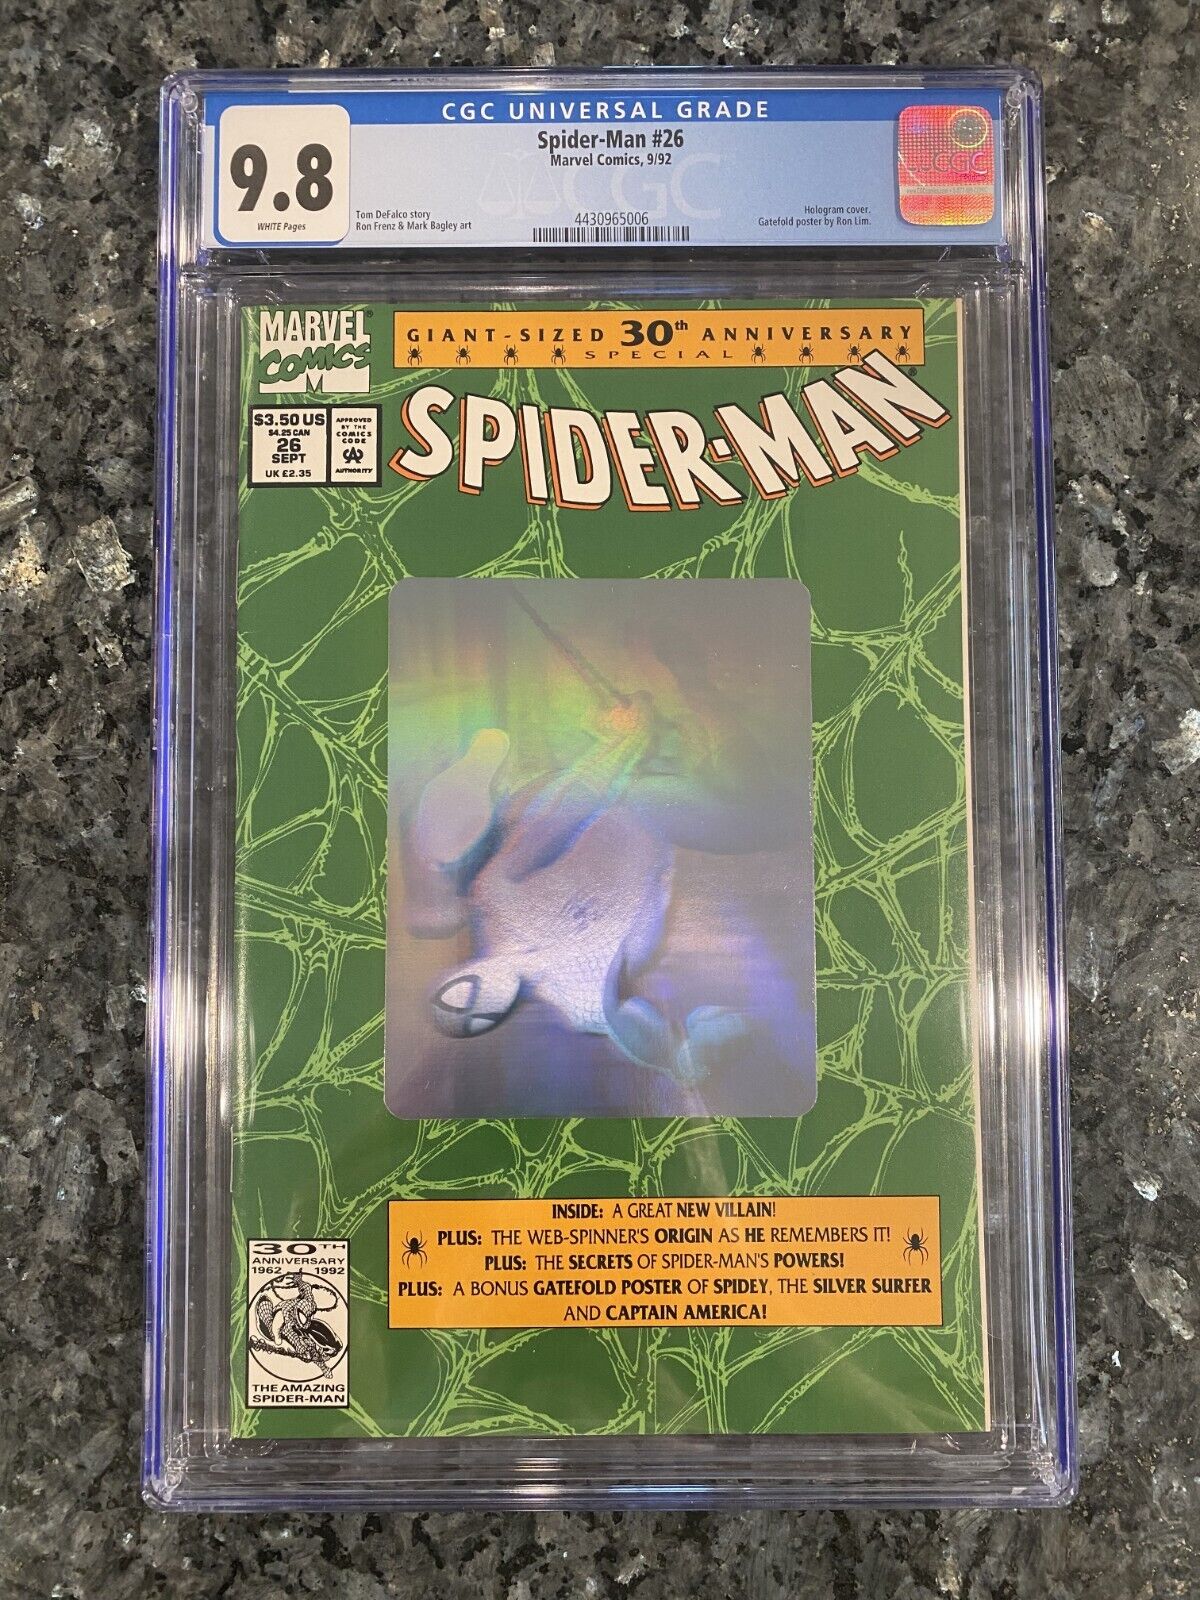 Web of Intrigue: Spider-Man #26 - CGC 9.8 White Pages - Key Issue Hologram Cover